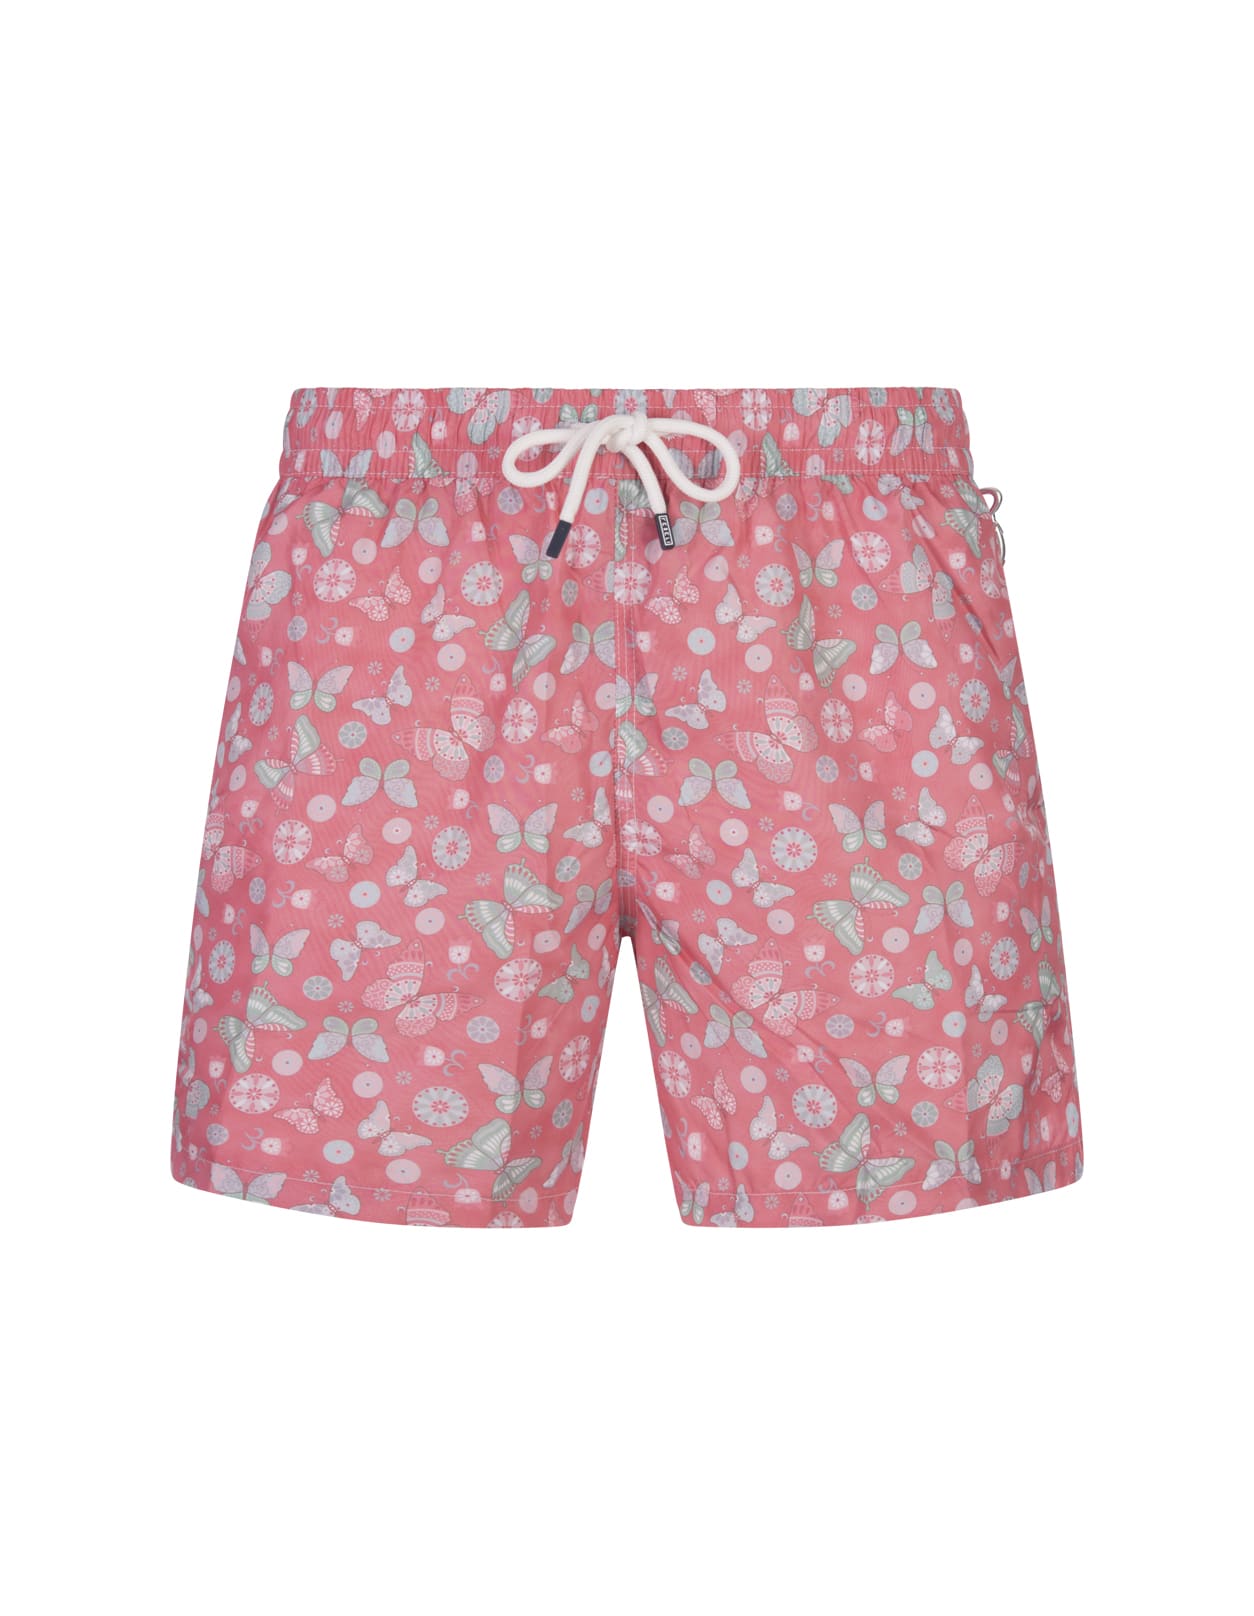 Shop Fedeli Pink Swim Shorts With Butterfly Print